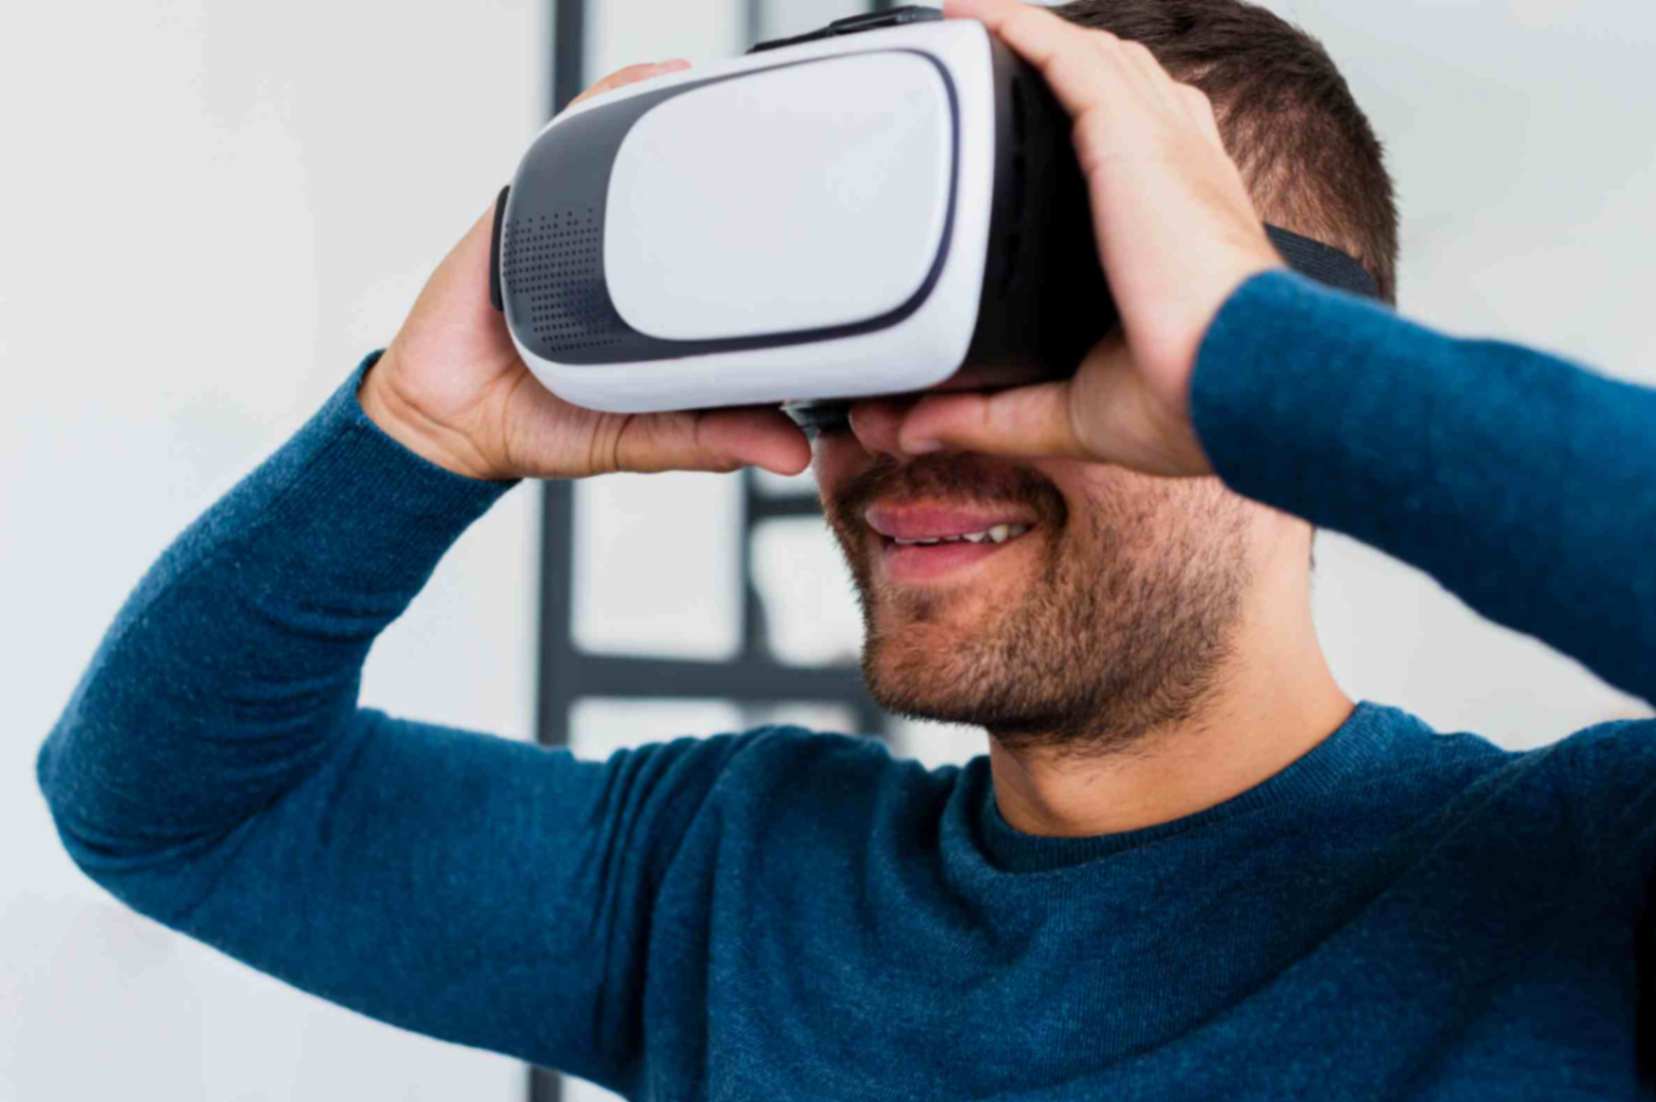 A man wearing a VR headset and is smiling. He is also wearing a blue shirt